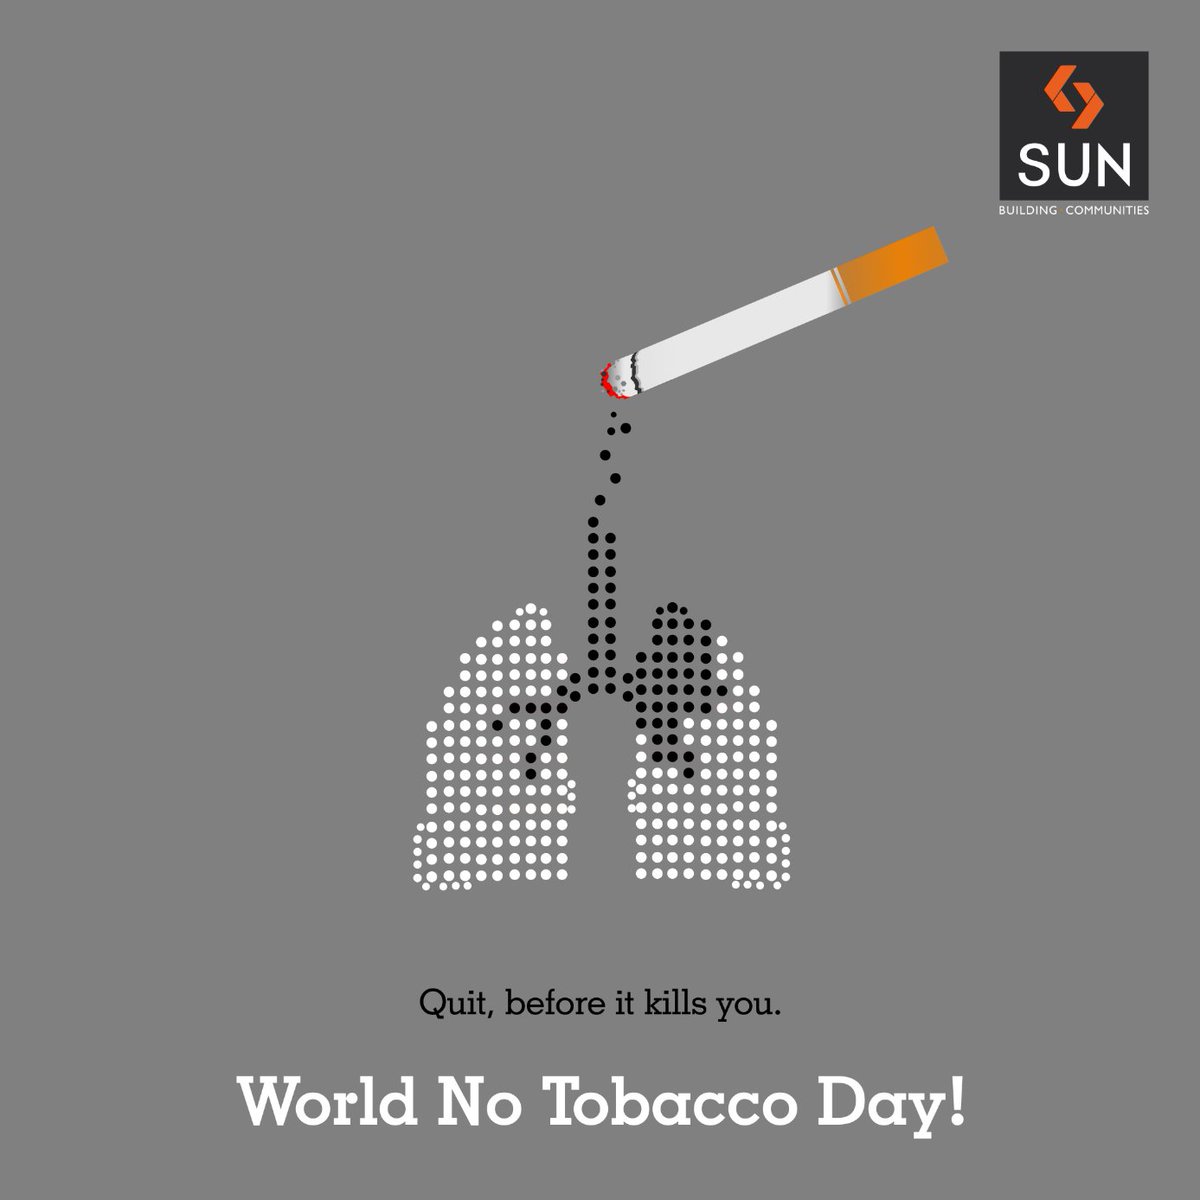 Together,let’s say no to tobacco & spread awareness about the risk of consuming it on #WorldNoTobaccoDay. #ToTobacco https://t.co/sKPyRmfzlP